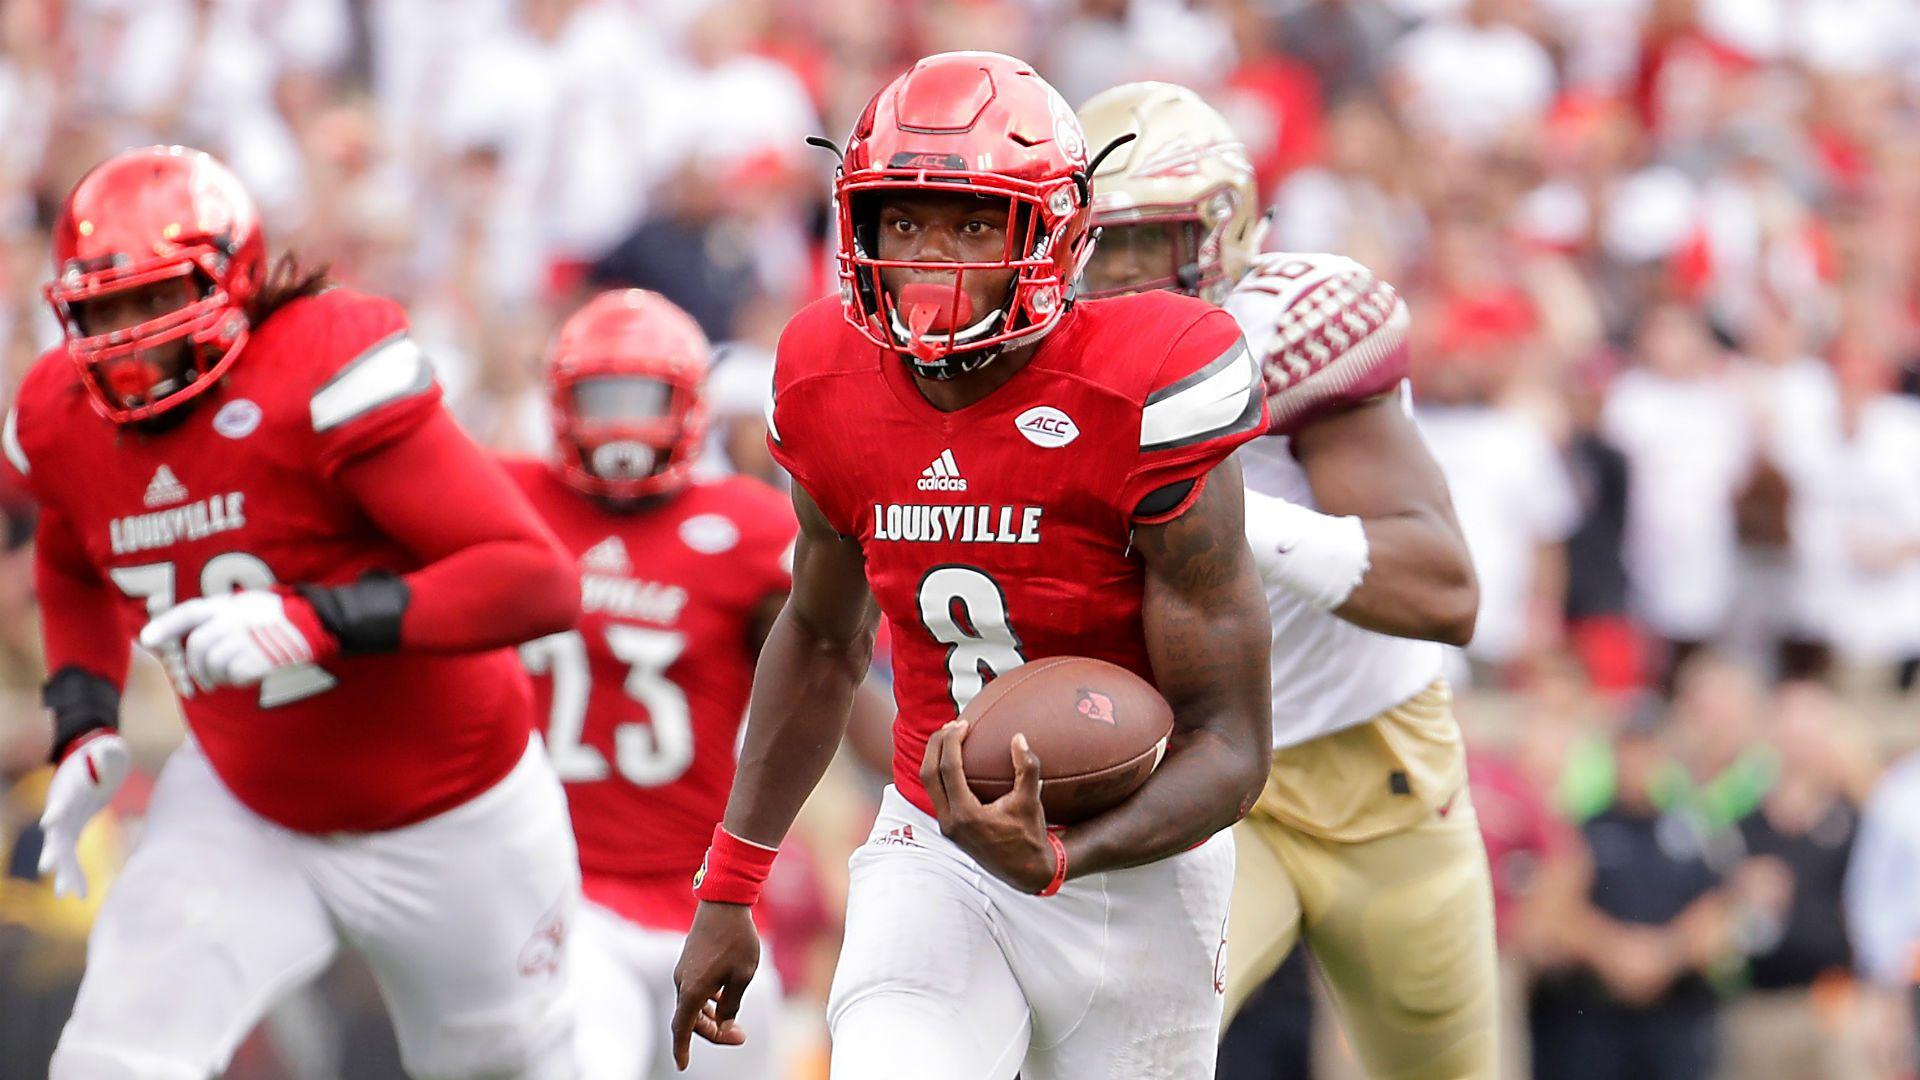 Louisville's rout of FSU shows there are lots of expansion